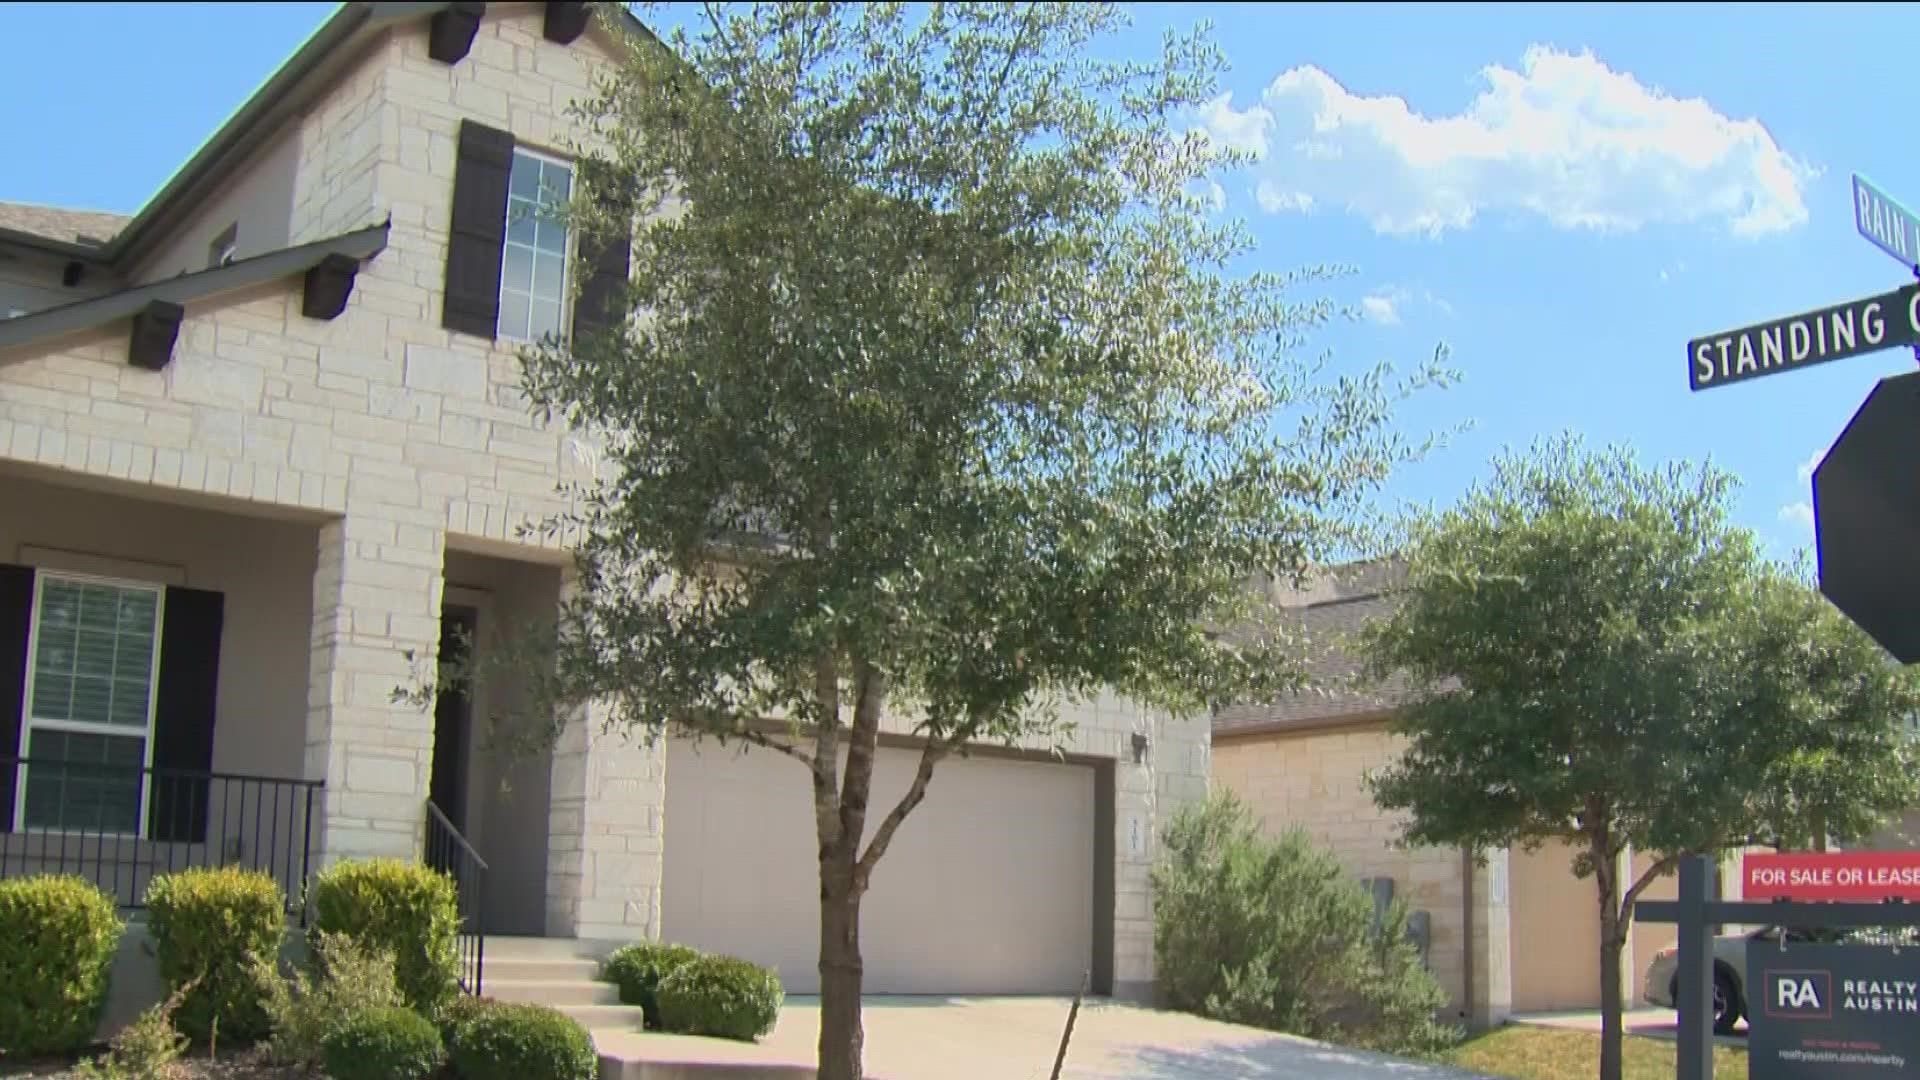 Austin is seeing an increase in home listings for the first time in almost four years. KVUE's Maria Aguilera explains if it's shifting to a buyer's market